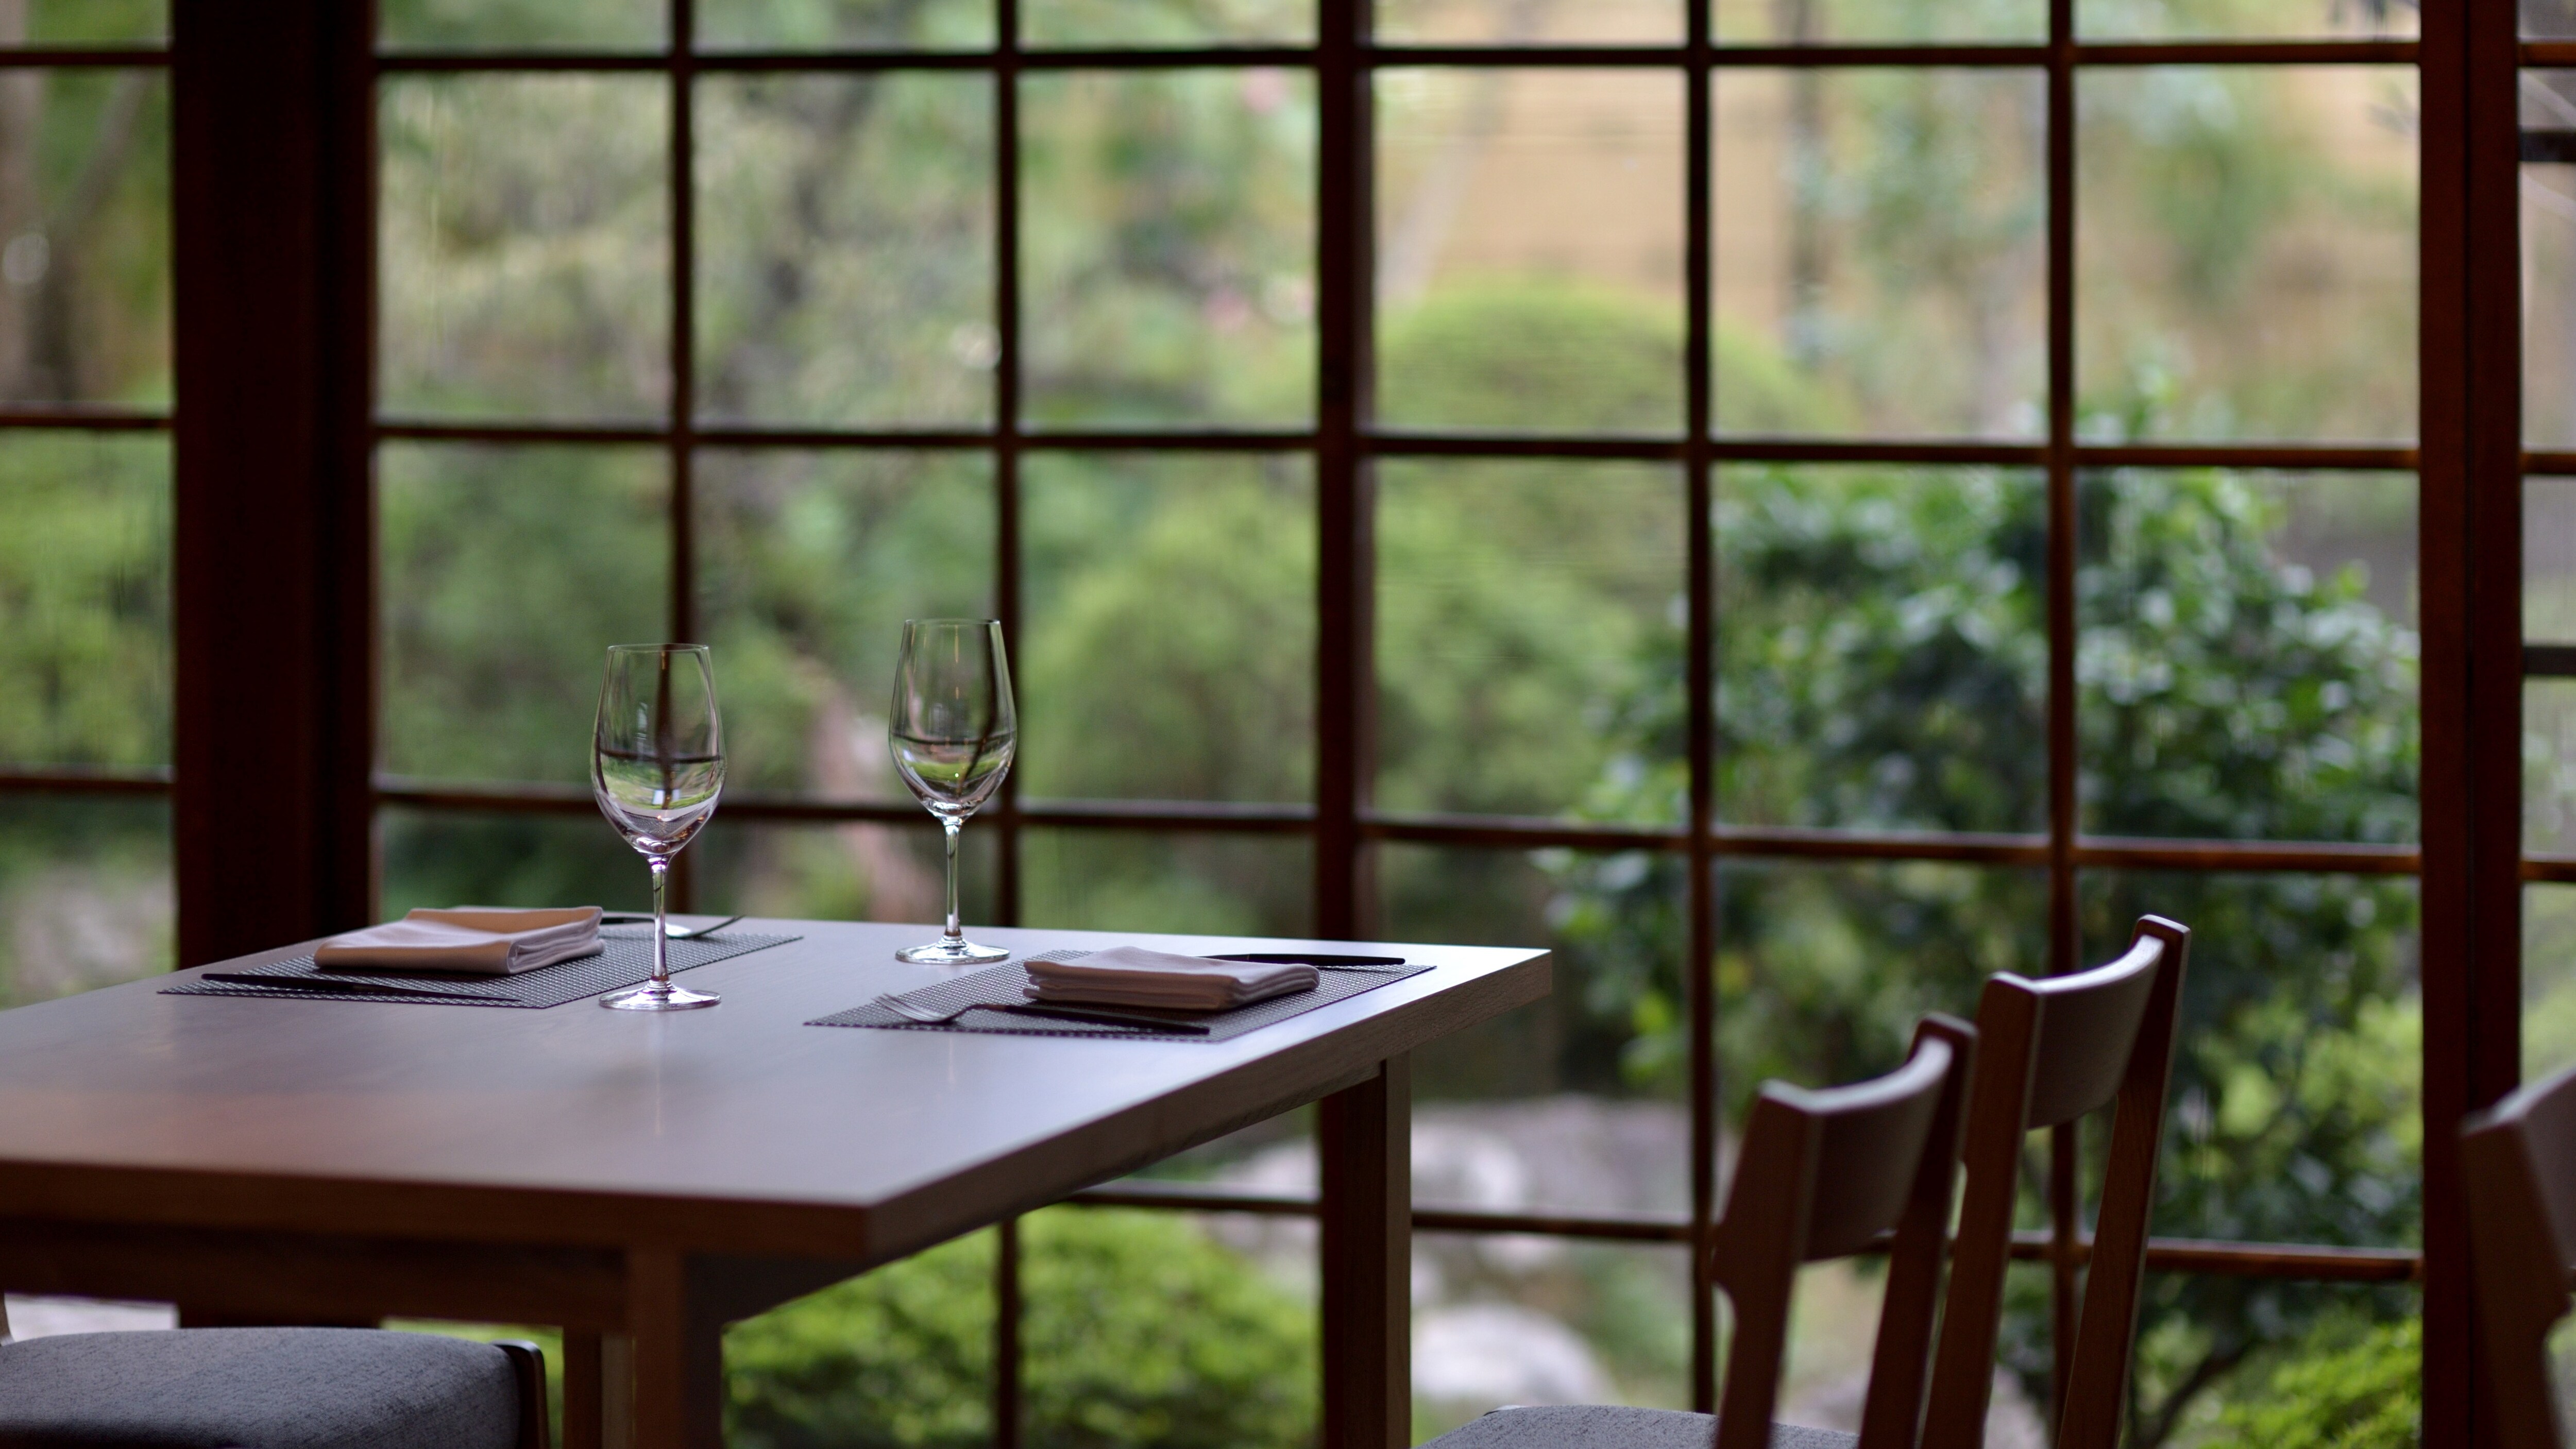 [Dining] The restaurant has a spacious space overlooking the courtyard, giving it a feeling of openness.